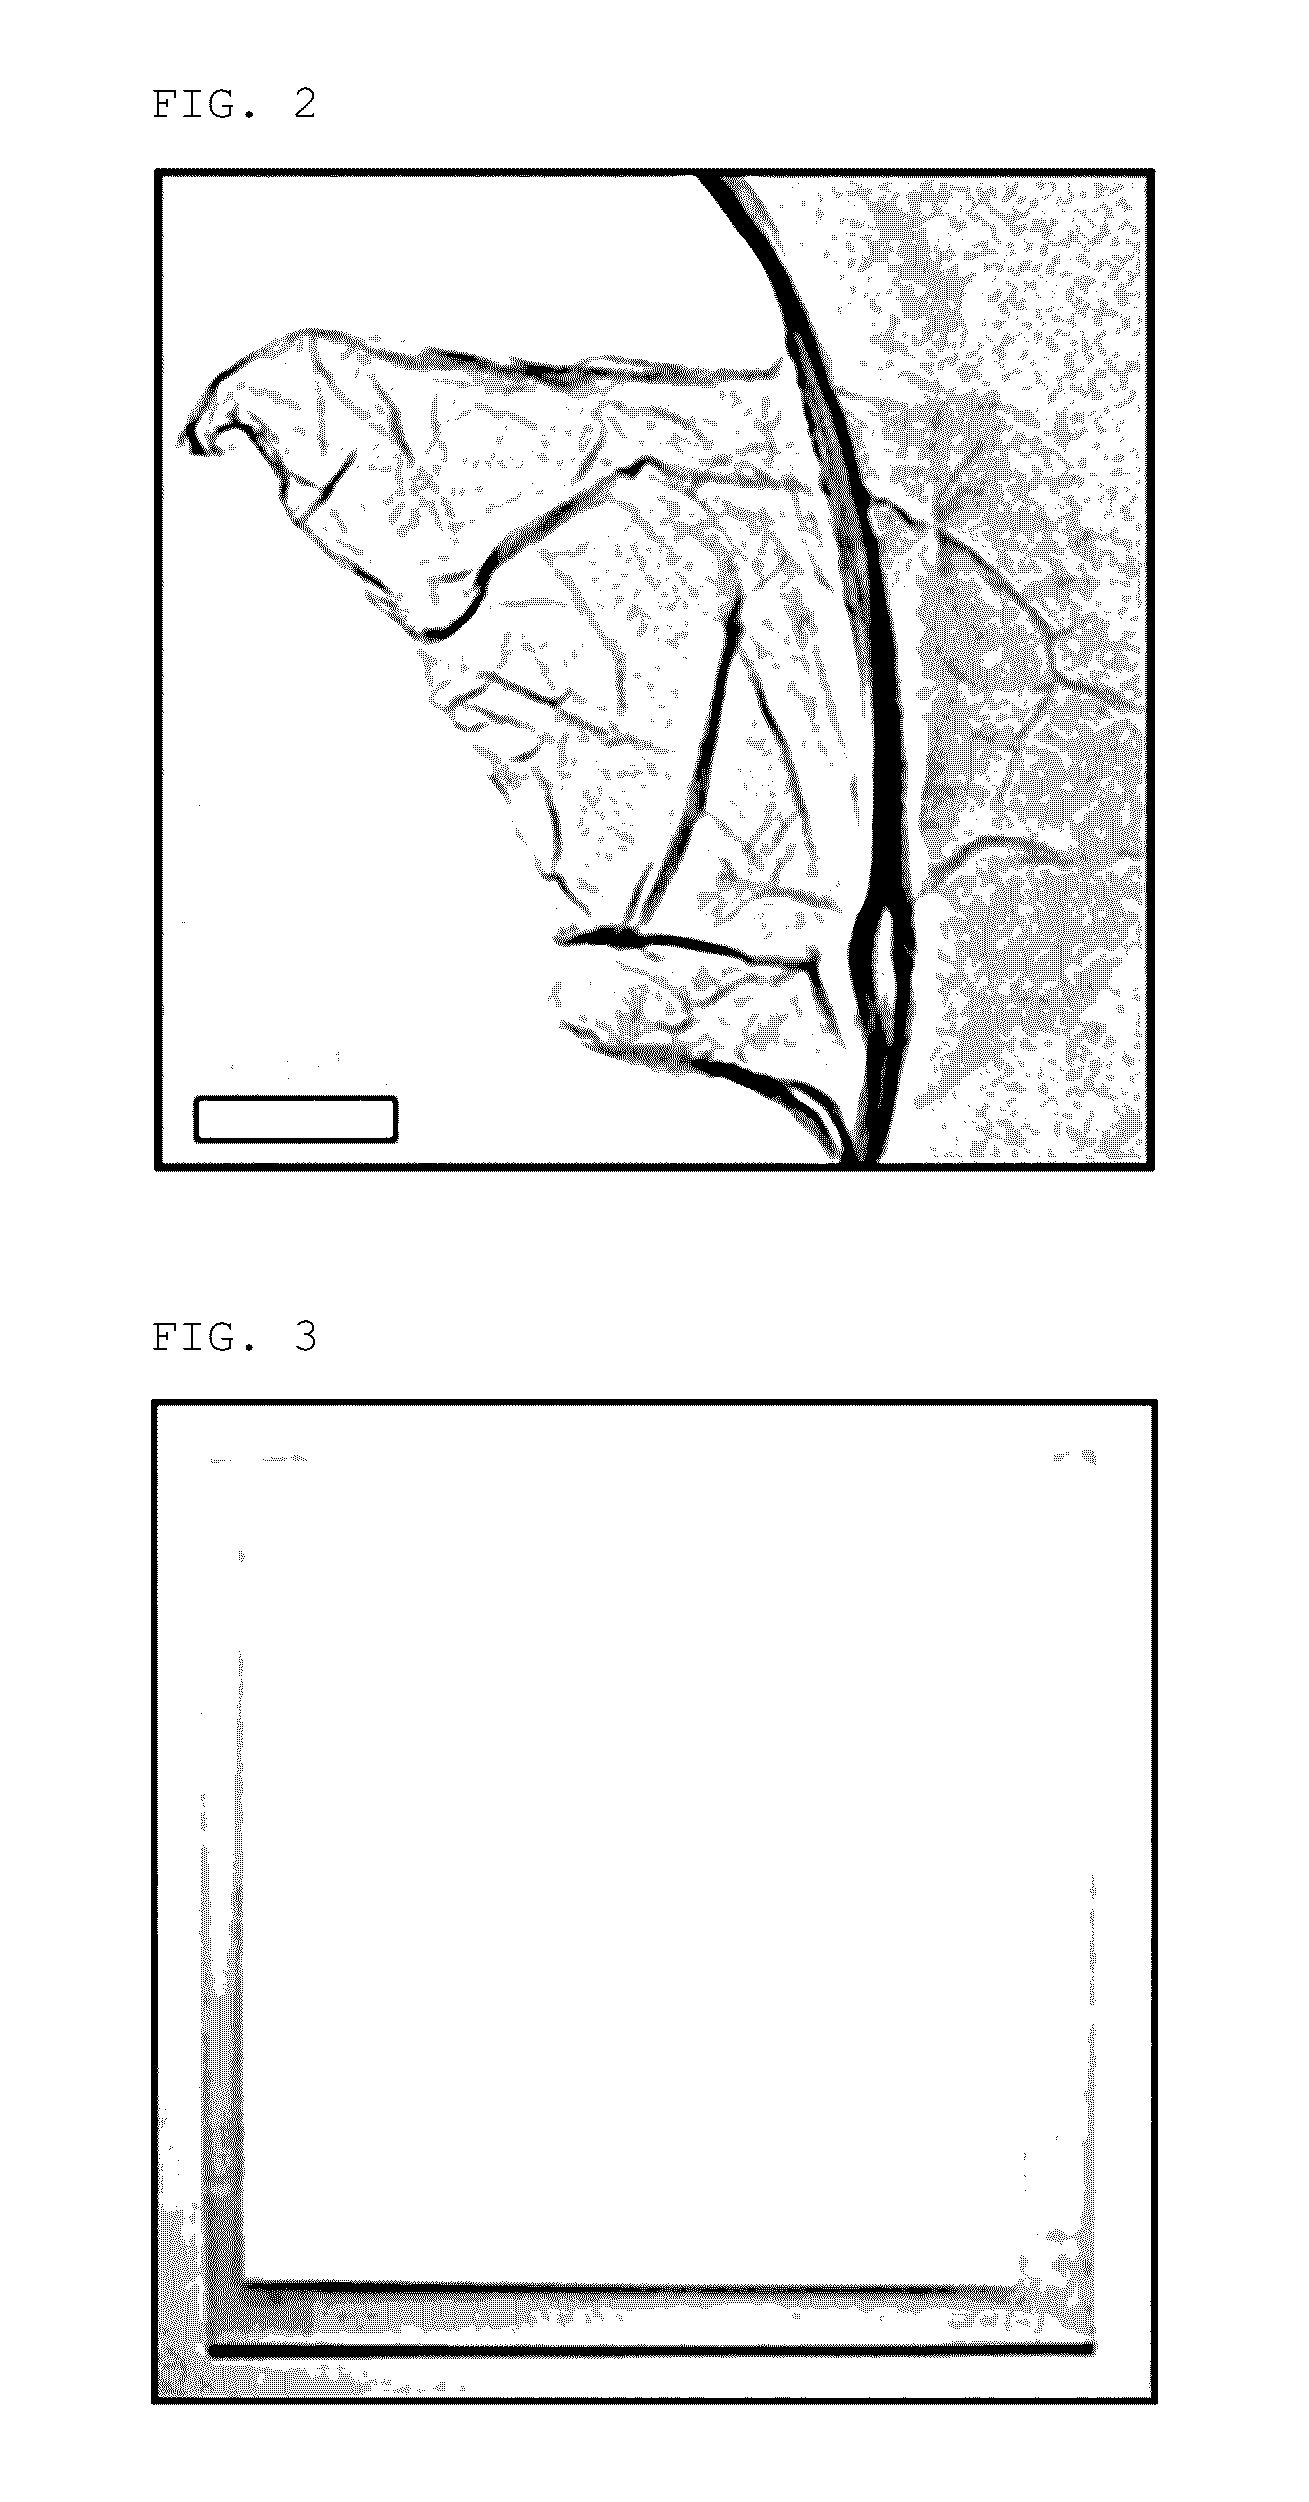 Graphene oxide nanocomposite membrane having improved gas barrier characteristics and method for manufacturing the same